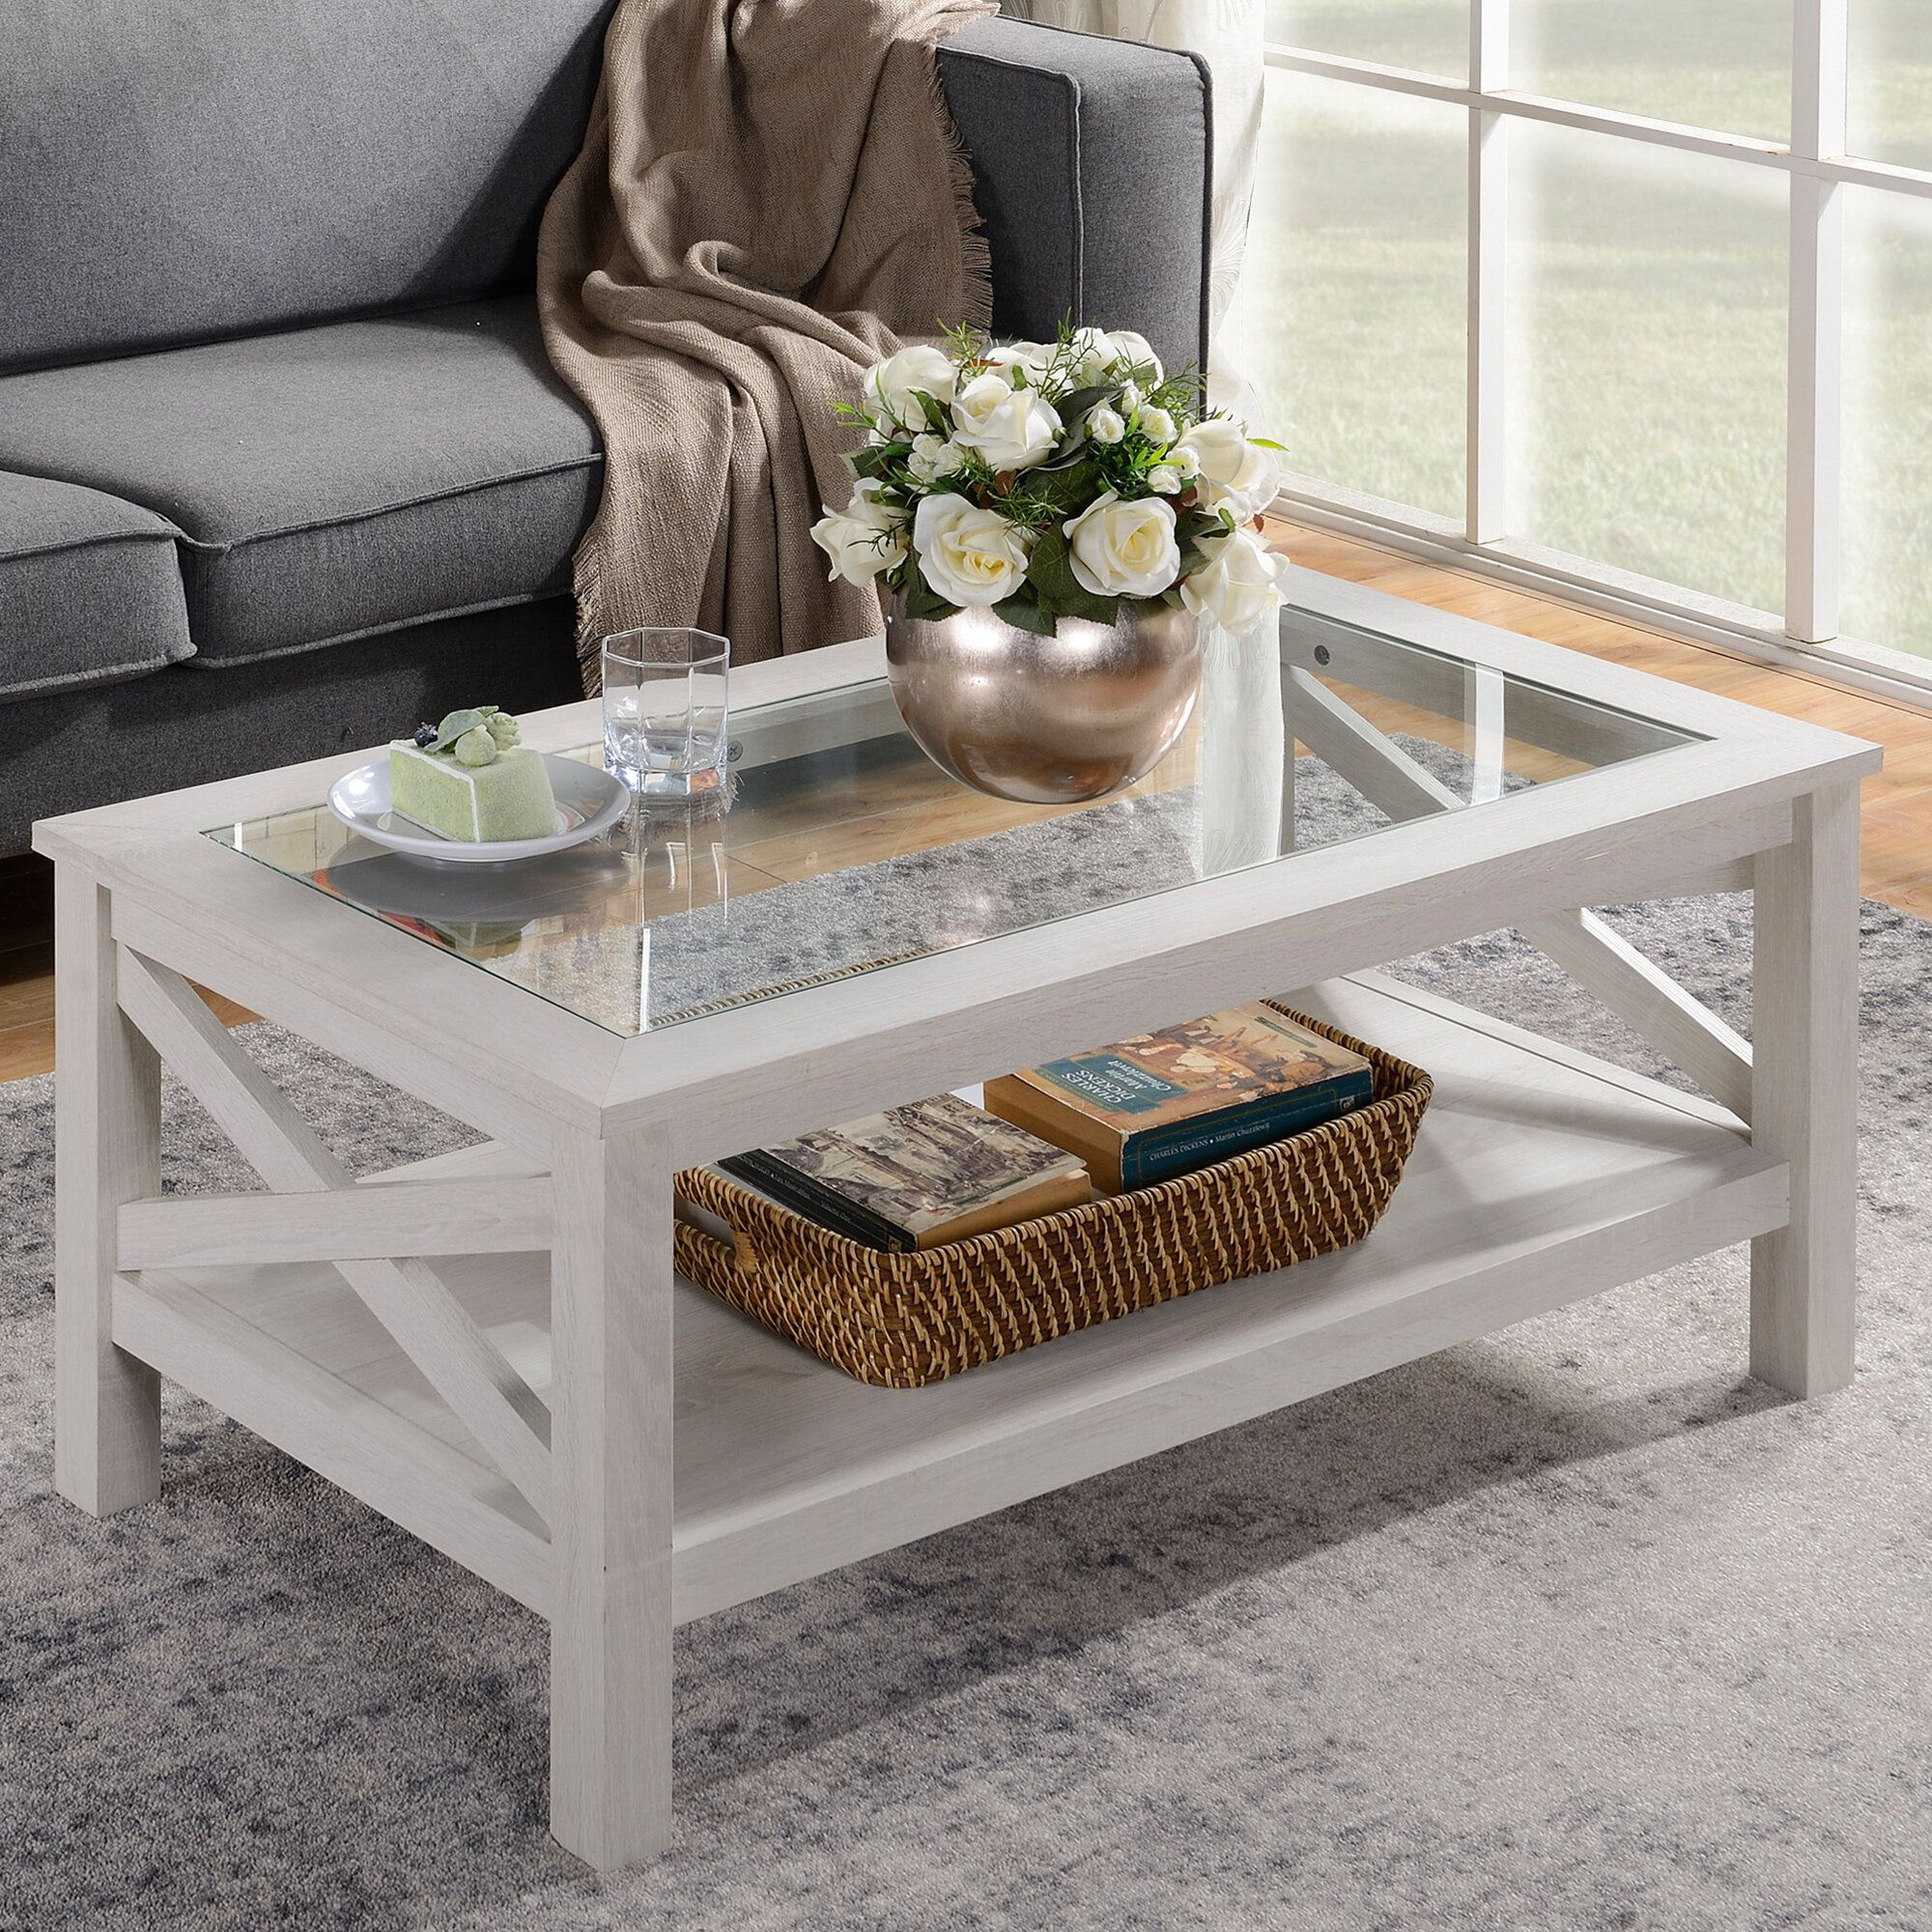 Gracie Oaks Espinet Coffee Table & Reviews | Wayfair Regarding Glass Coffee Tables With Lower Shelves (View 4 of 15)